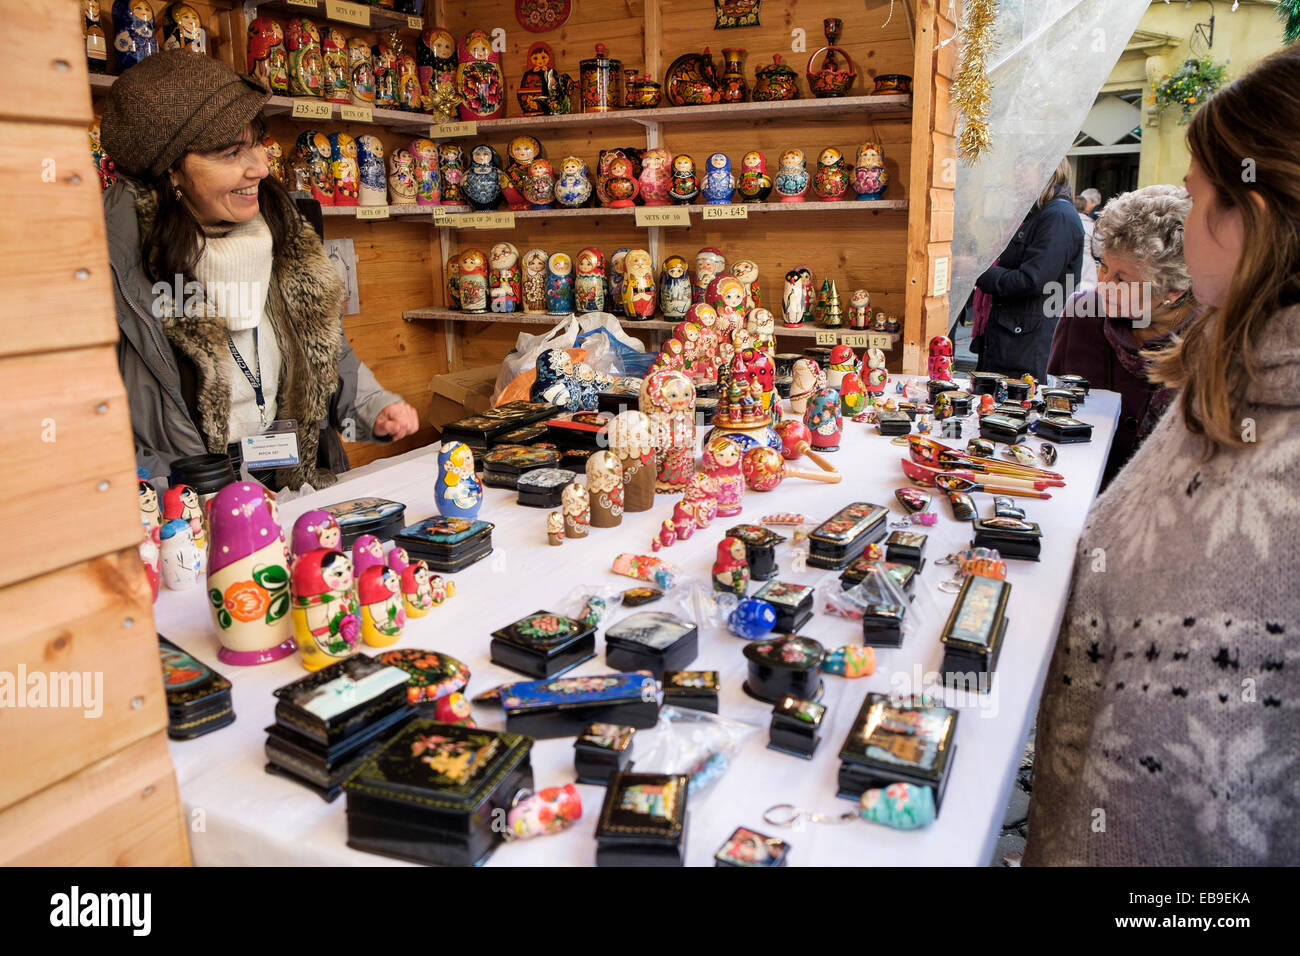 Bath, UK, 27th November 2014. Members of the public are pictured viewing nesting Russian dolls being sold on a market stall on the opening day of the Bath Christmas market. Credit:  lynchpics/Alamy Live News Stock Photo